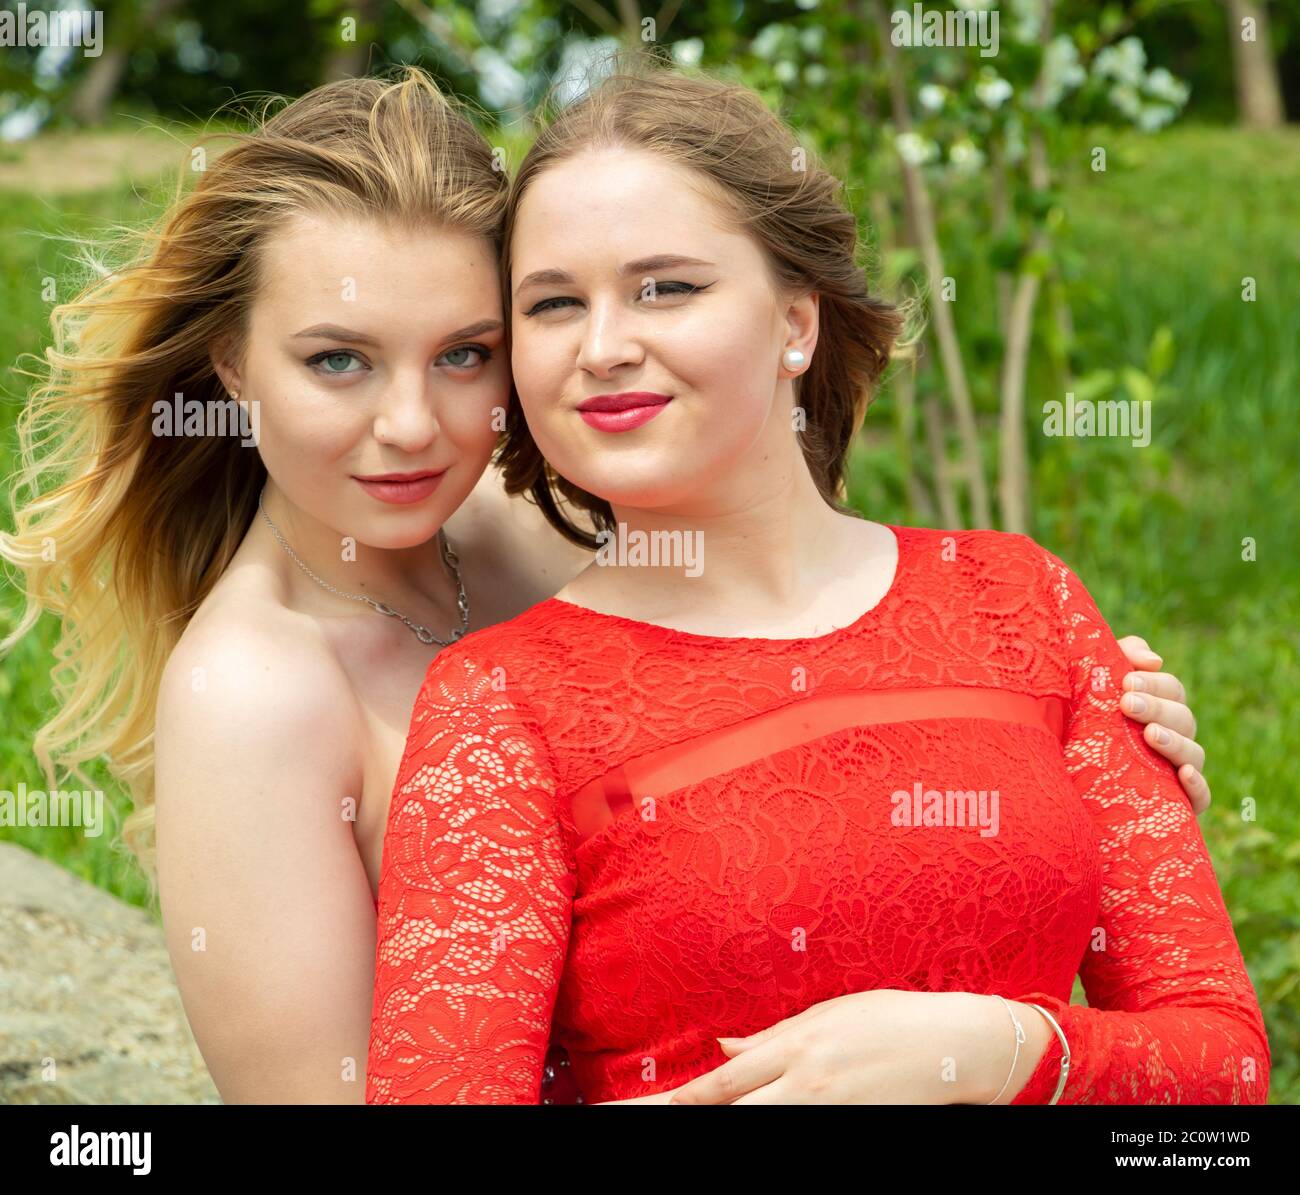 https://c8.alamy.com/comp/2C0W1WD/chisinau-moldova-june-05-2020-portrait-of-some-beautiful-girls-in-red-dresses-outside-in-park-2C0W1WD.jpg